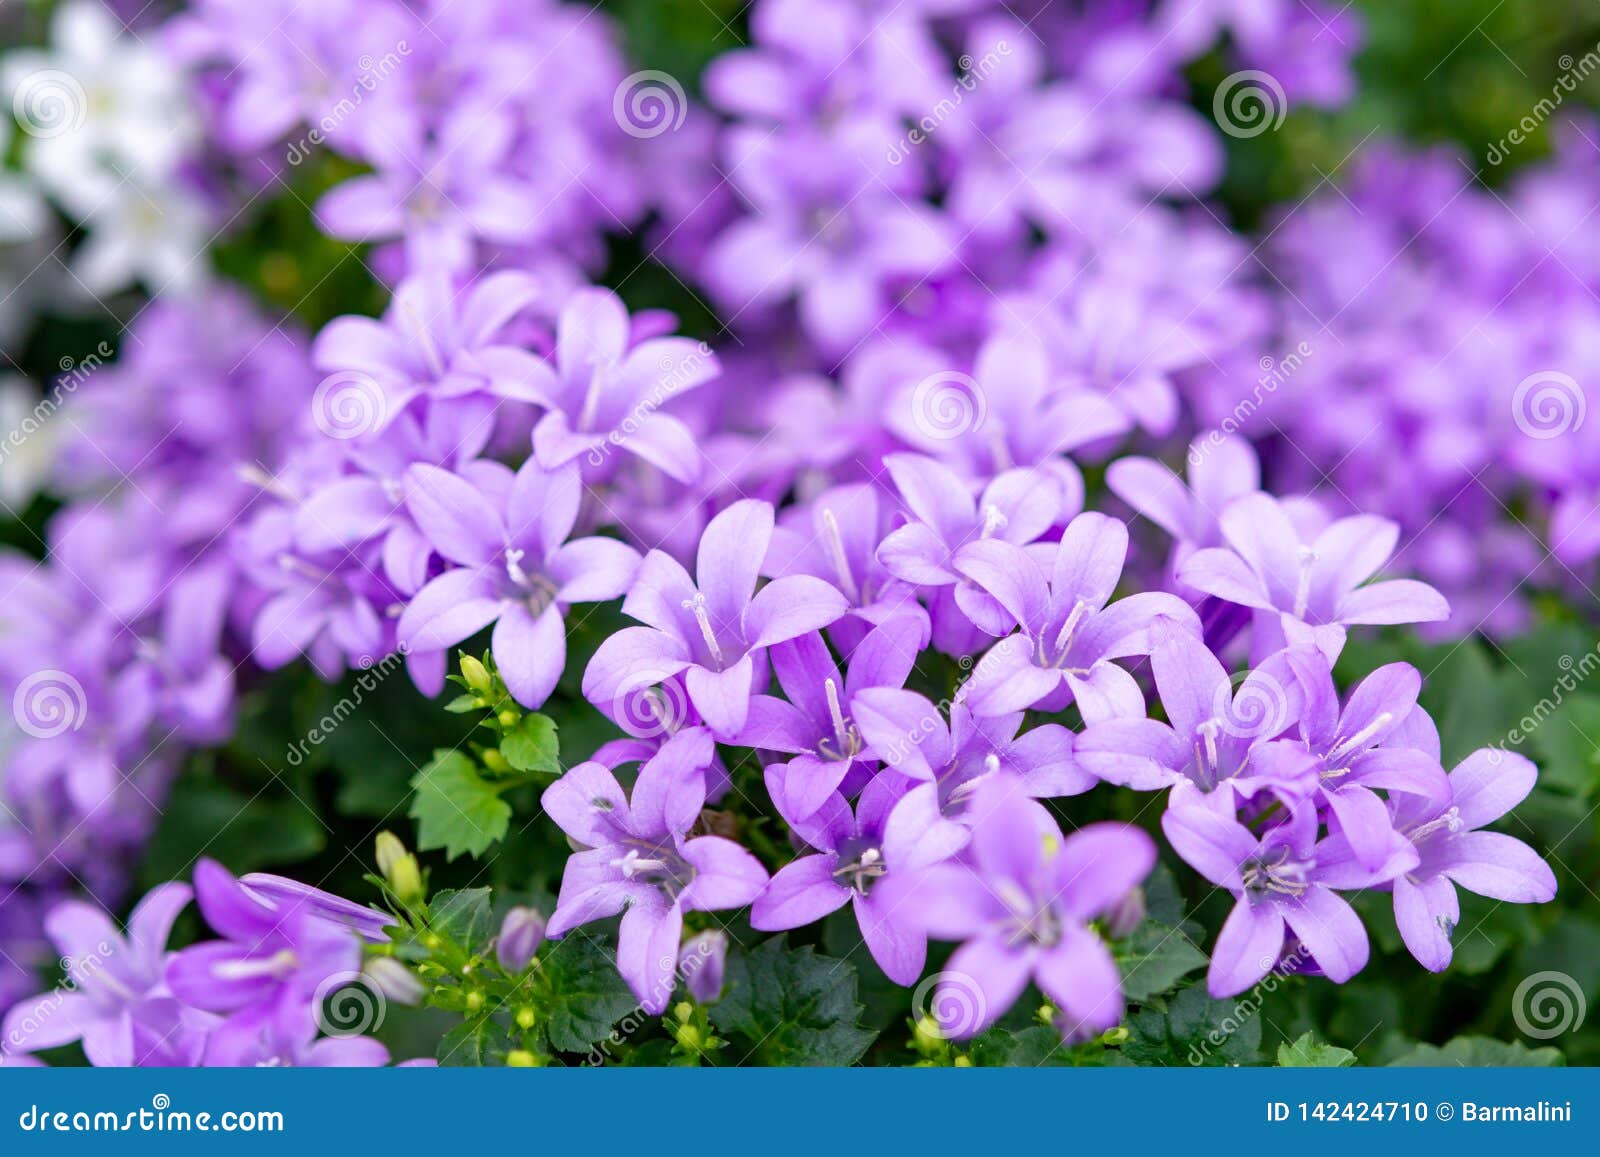 campanula americana or american bellflower, spring lilac flower for garden and decoration